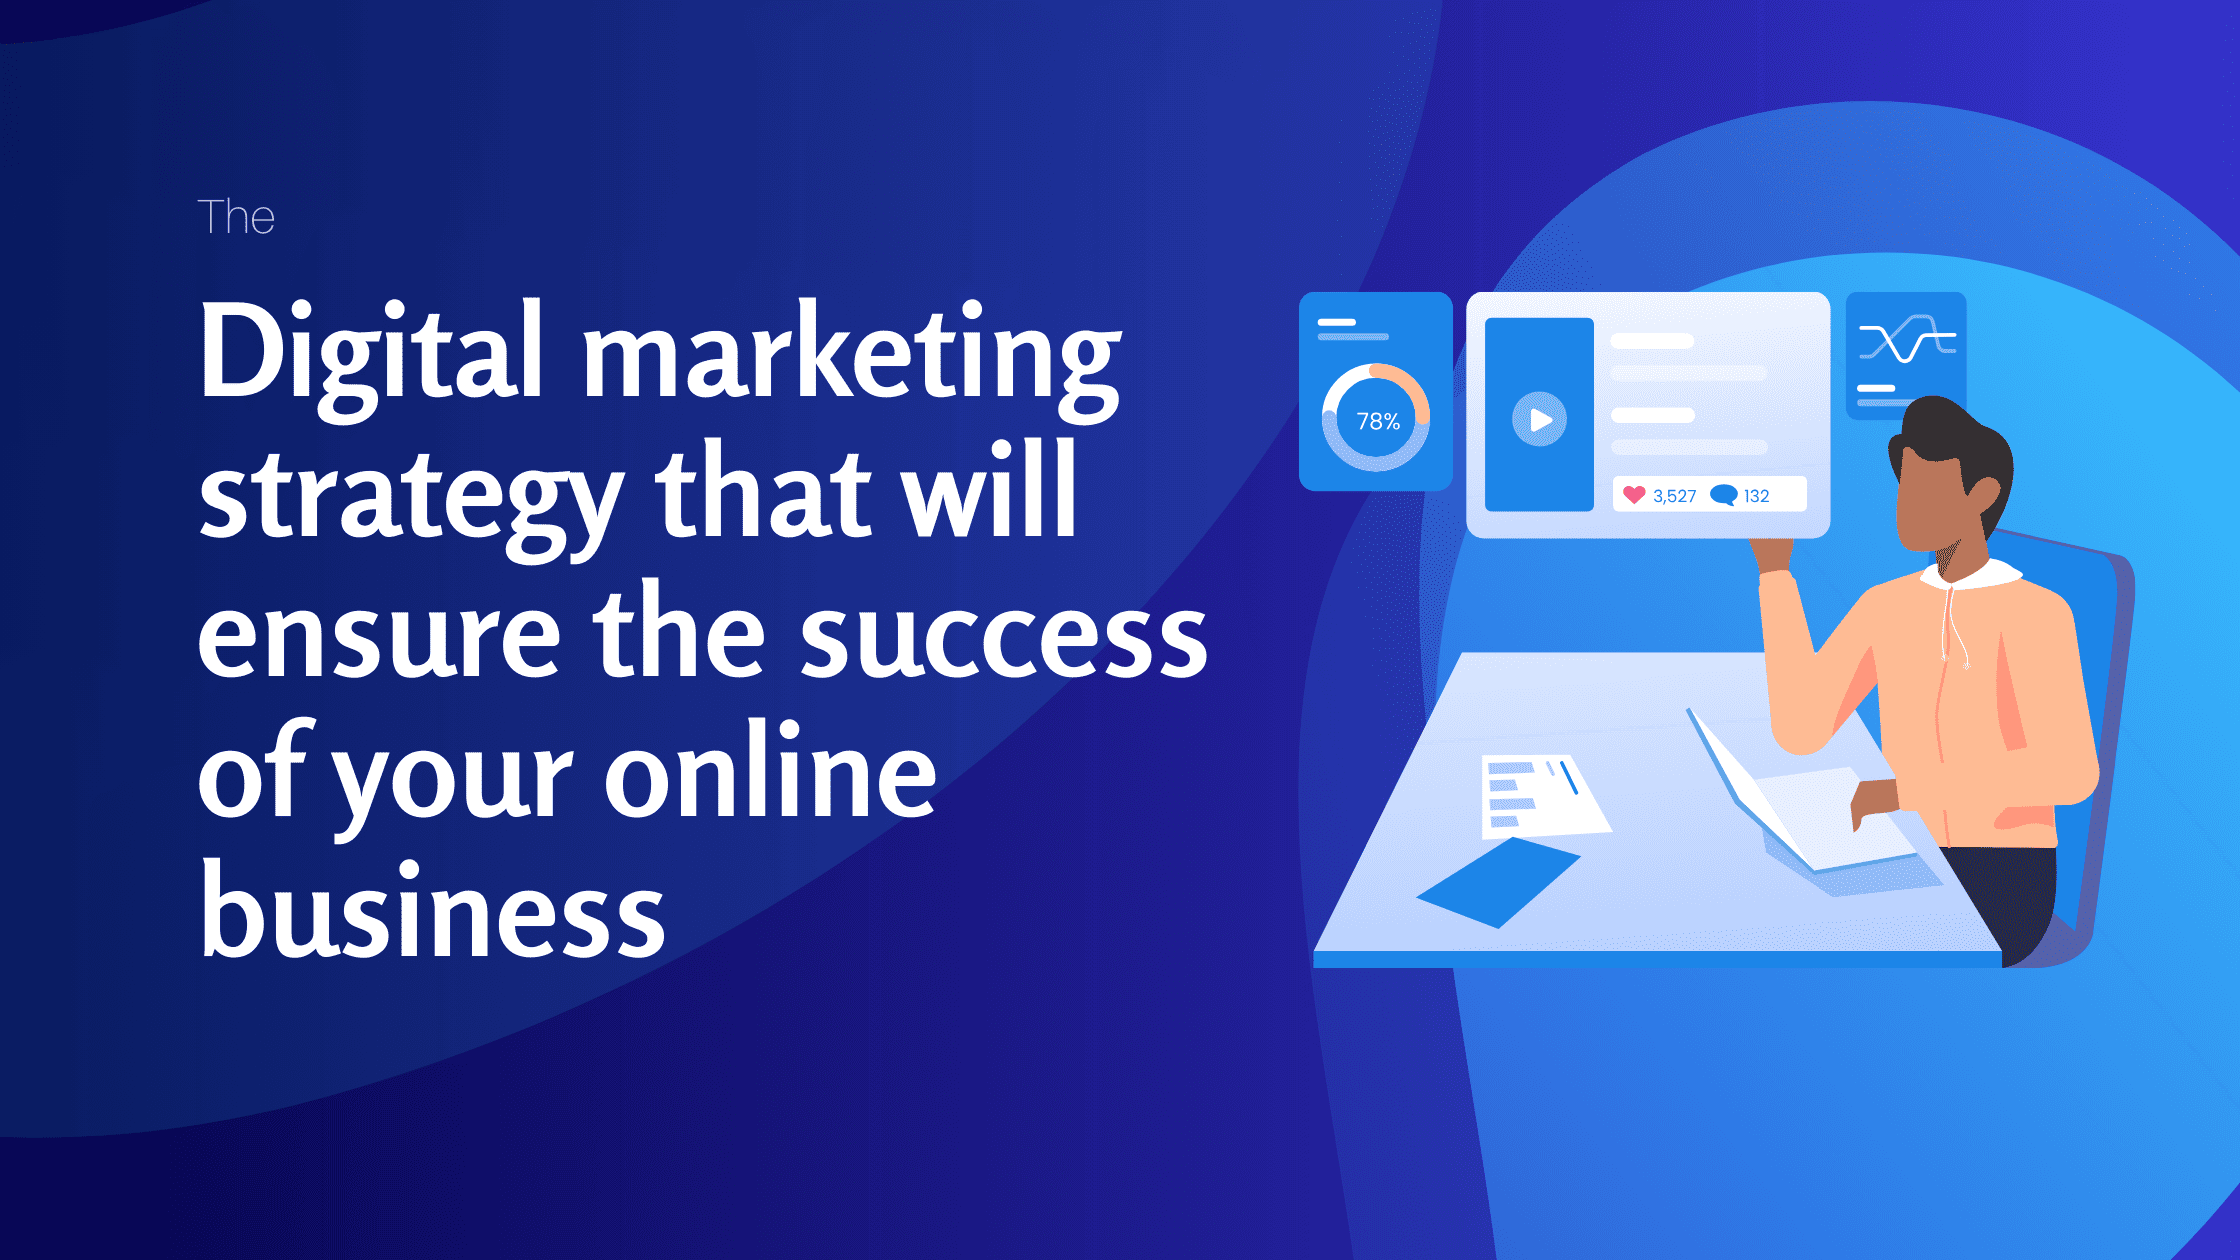 The digital marketing strategy that will ensure the success of your online business - Konectiz